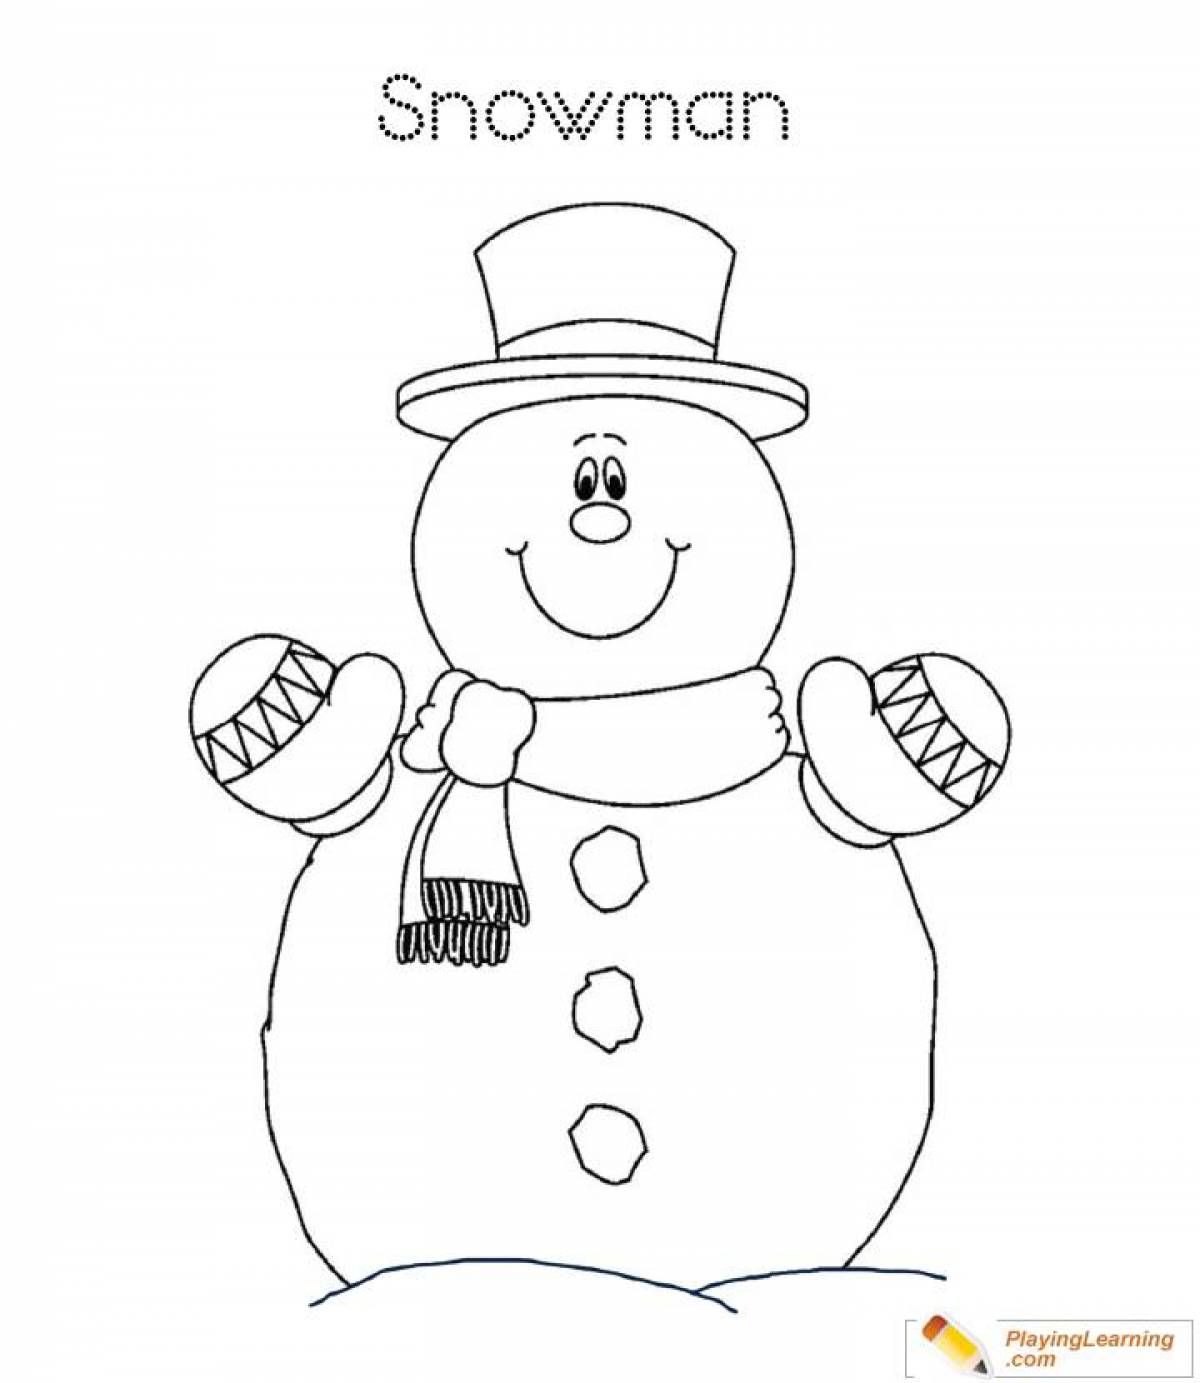 A fascinating snowman coloring book